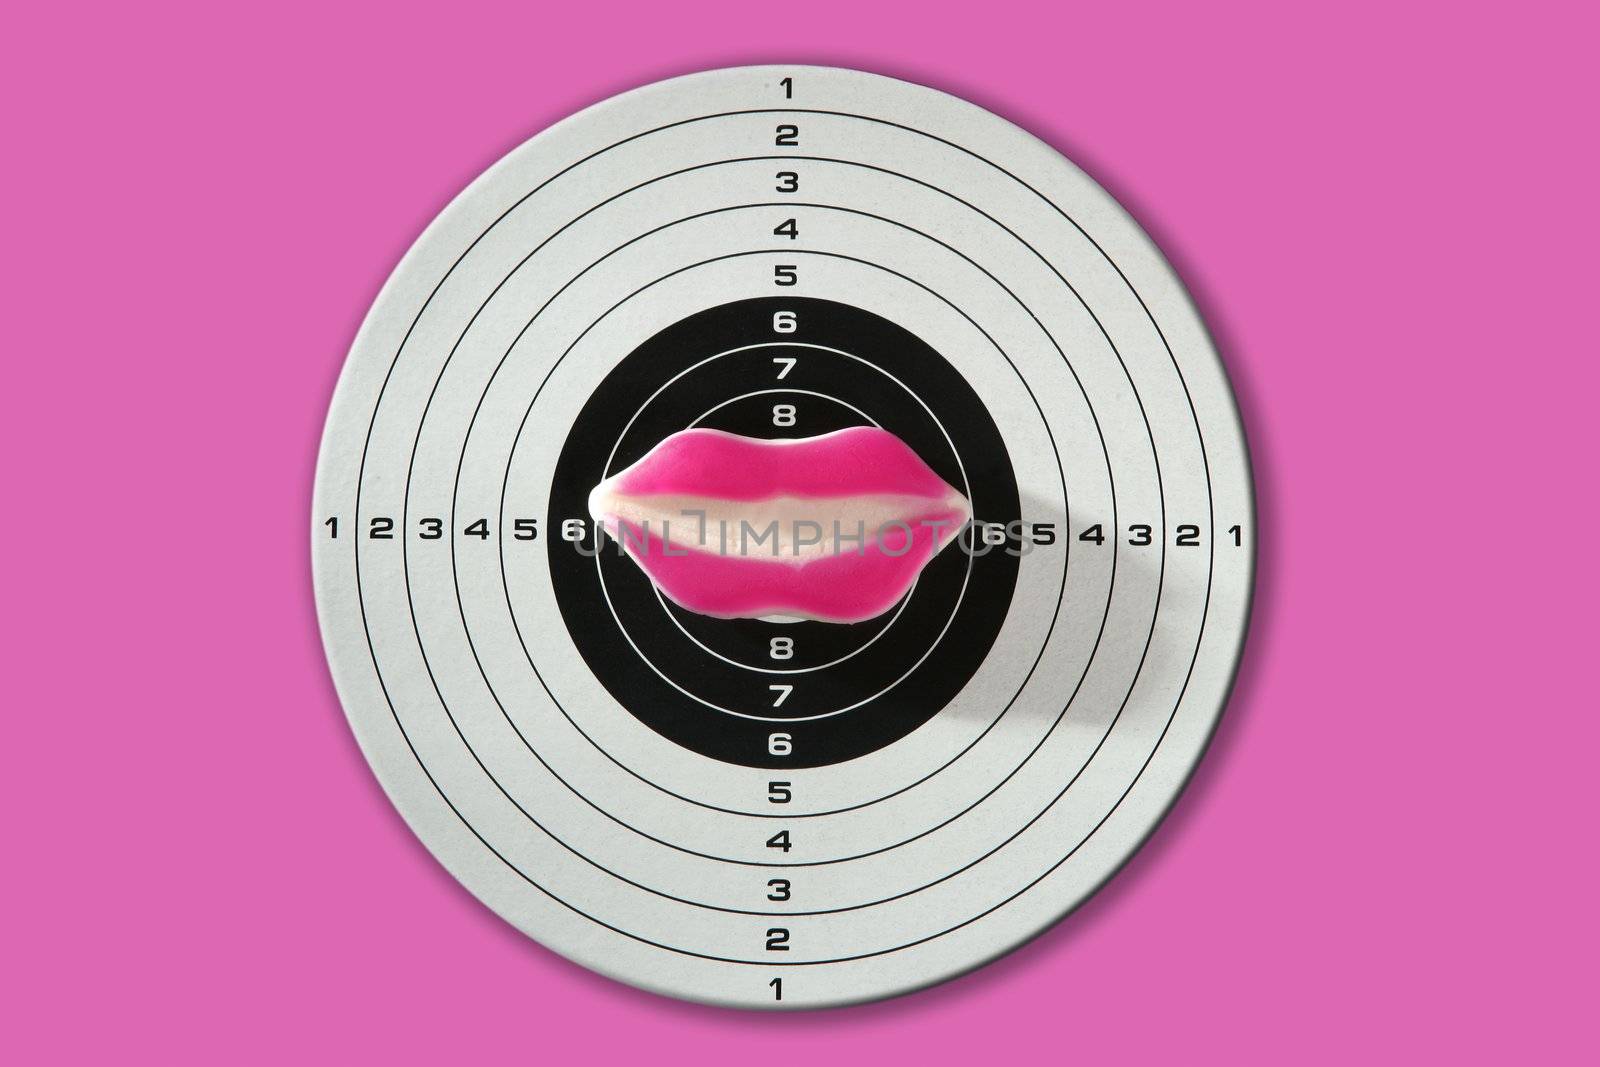 Target metaphor, the winner gets the sweet candy kiss from lips